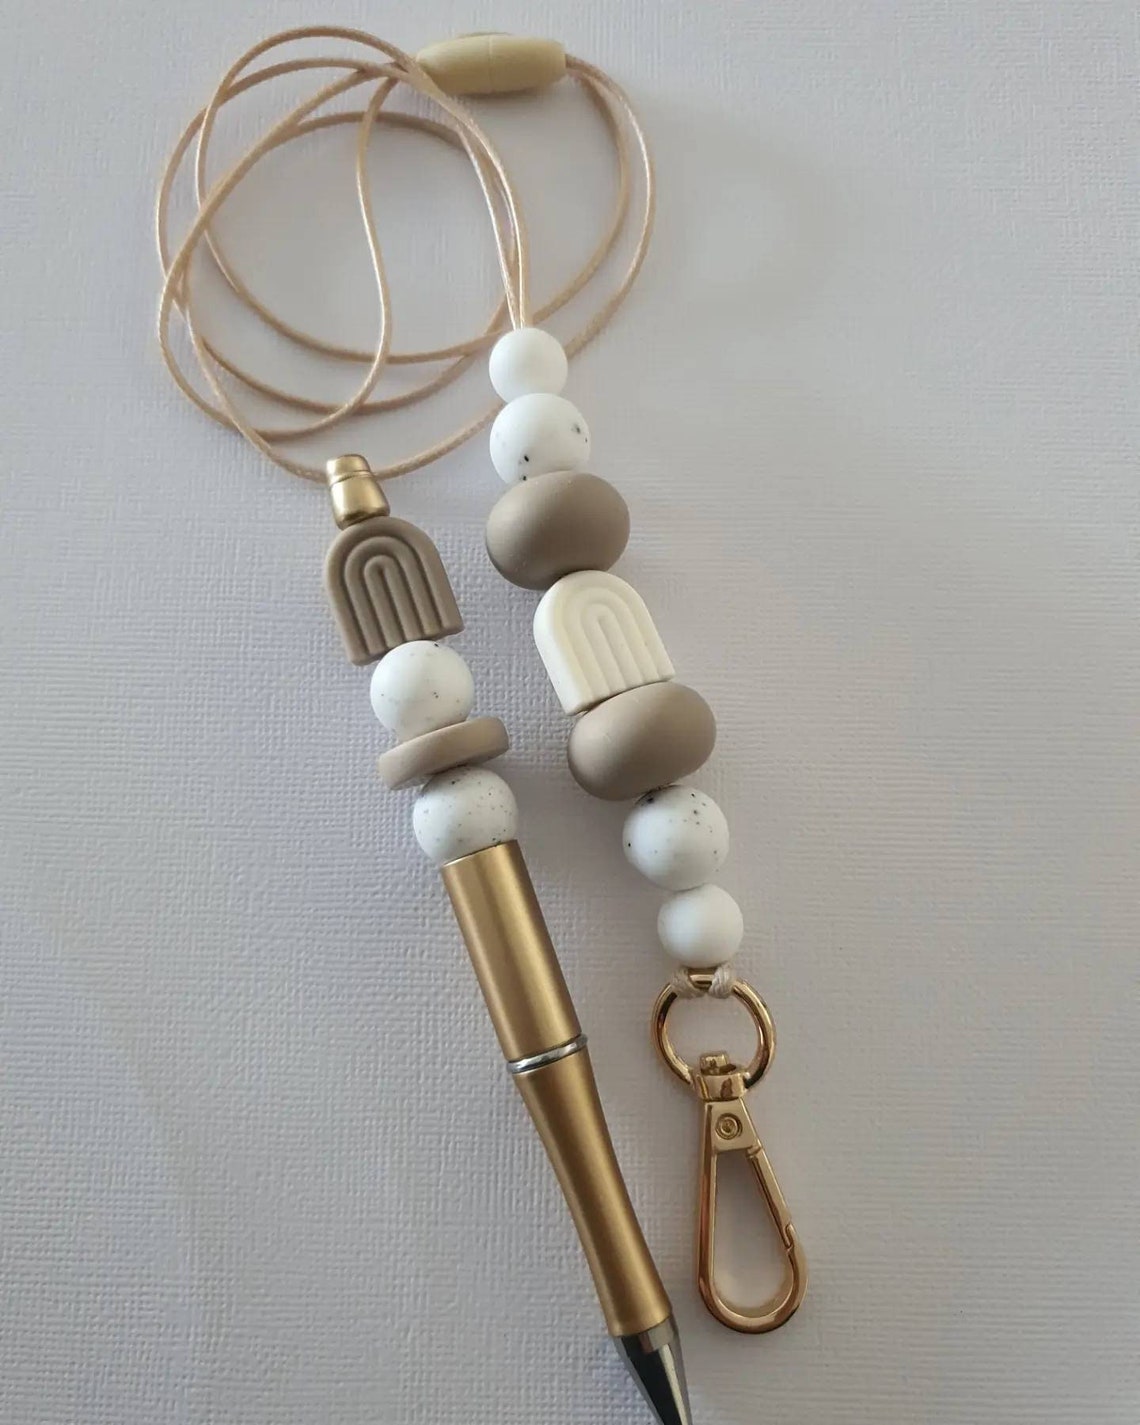 Silicone Arch Beaded PEN and LANYARD Set in BOHO Earth Tones - PeppaTree Design Store